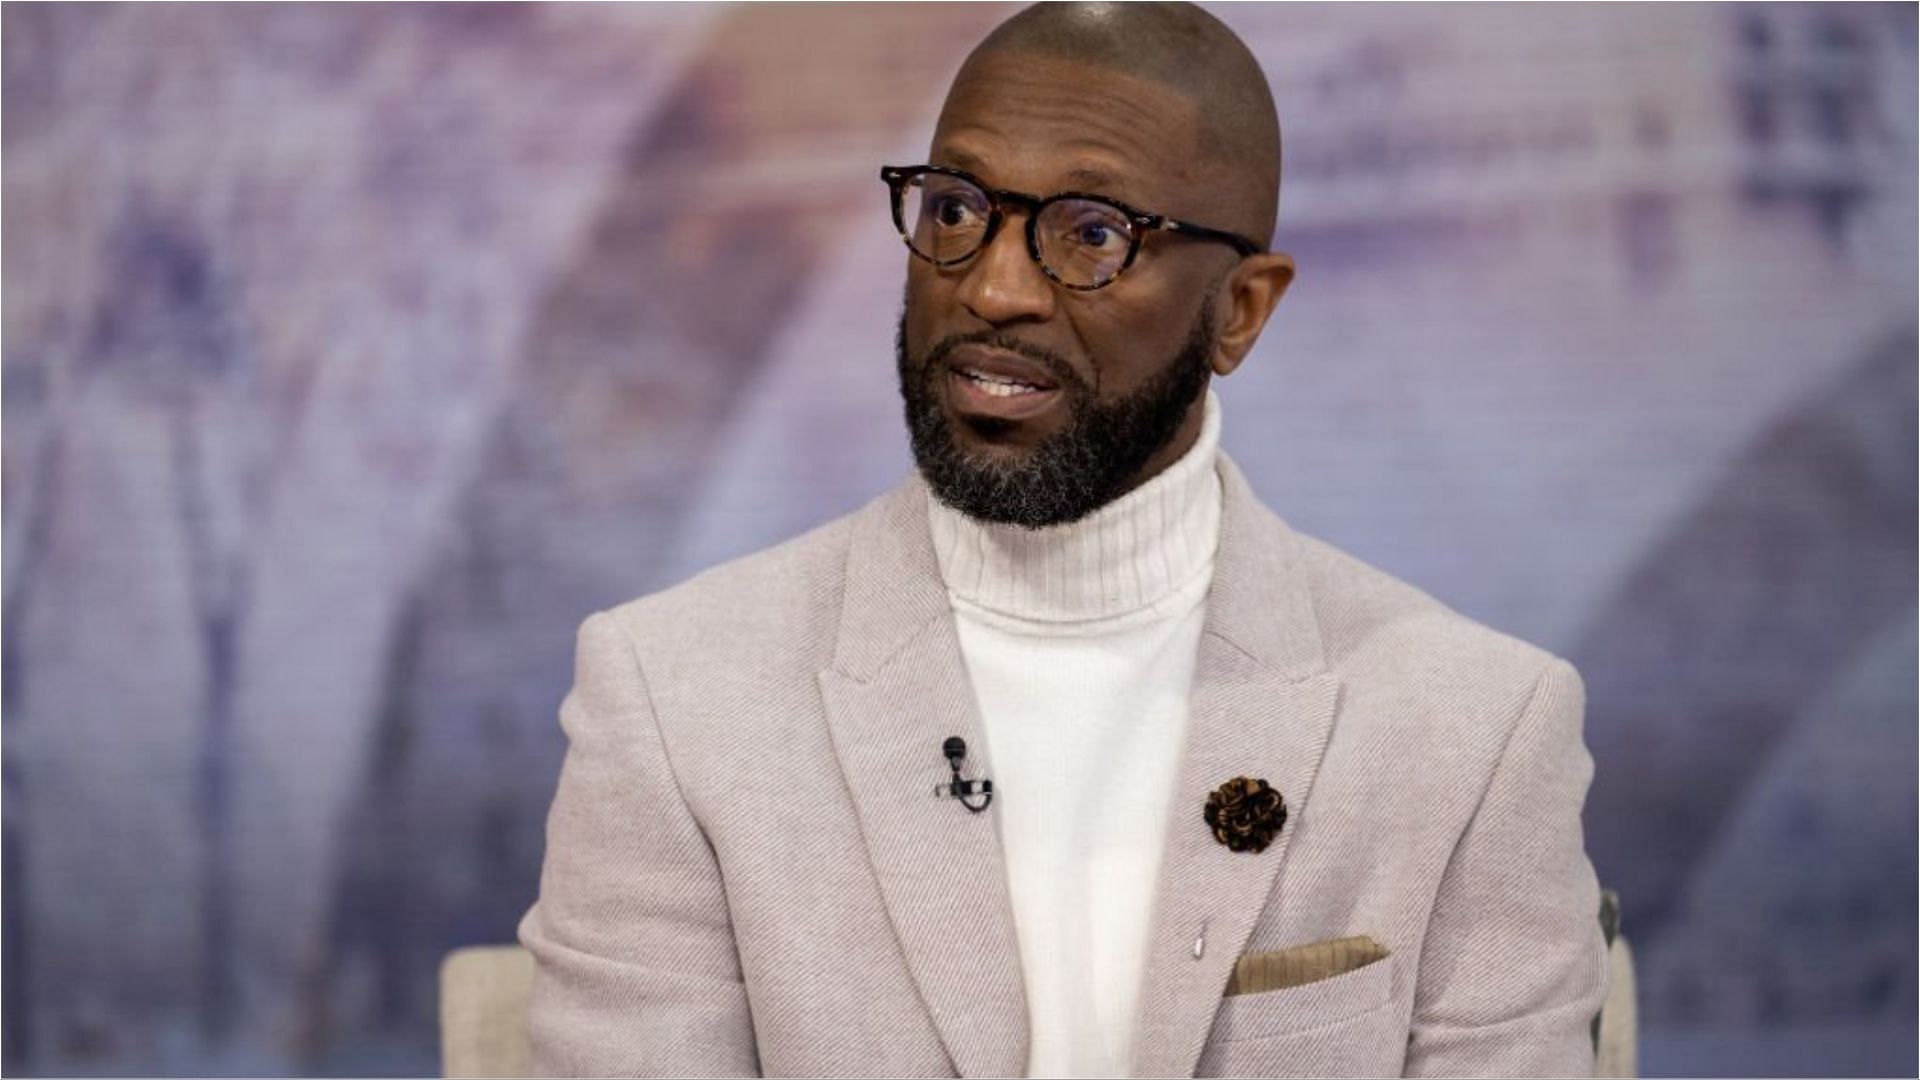 Rickey Smiley spoke about the possible reason behind his son